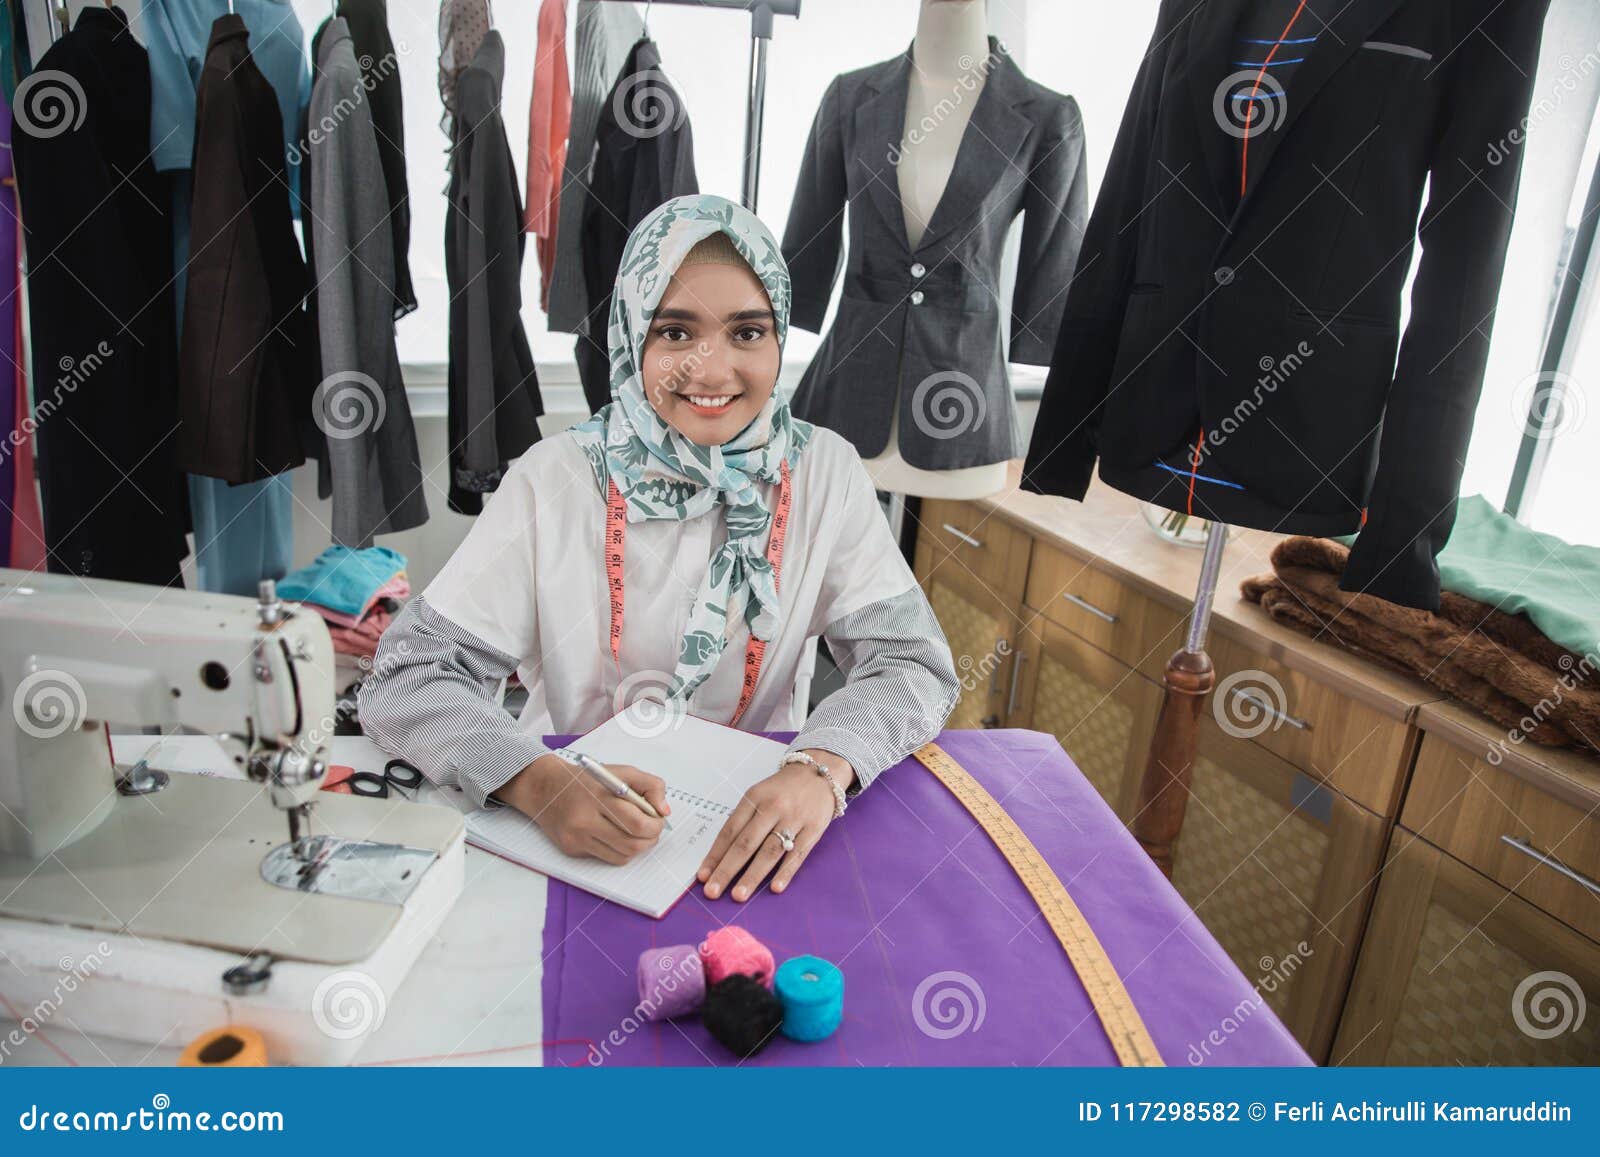 Woman Tailor Using Sewing Machine Stock Photo - Image of indoor, tailor ...